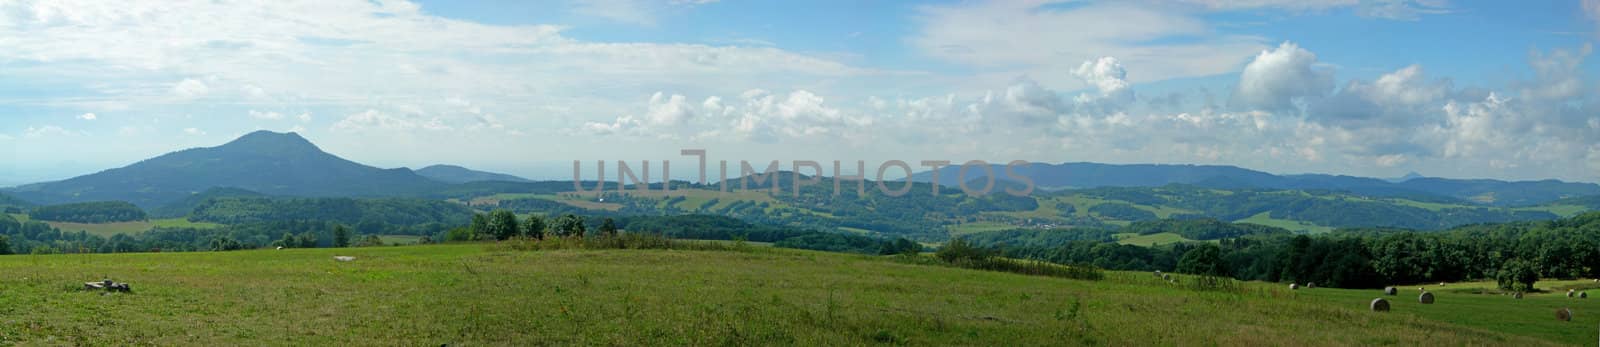 Landscape of a czech county - rural farms with hiils, pastures and fields